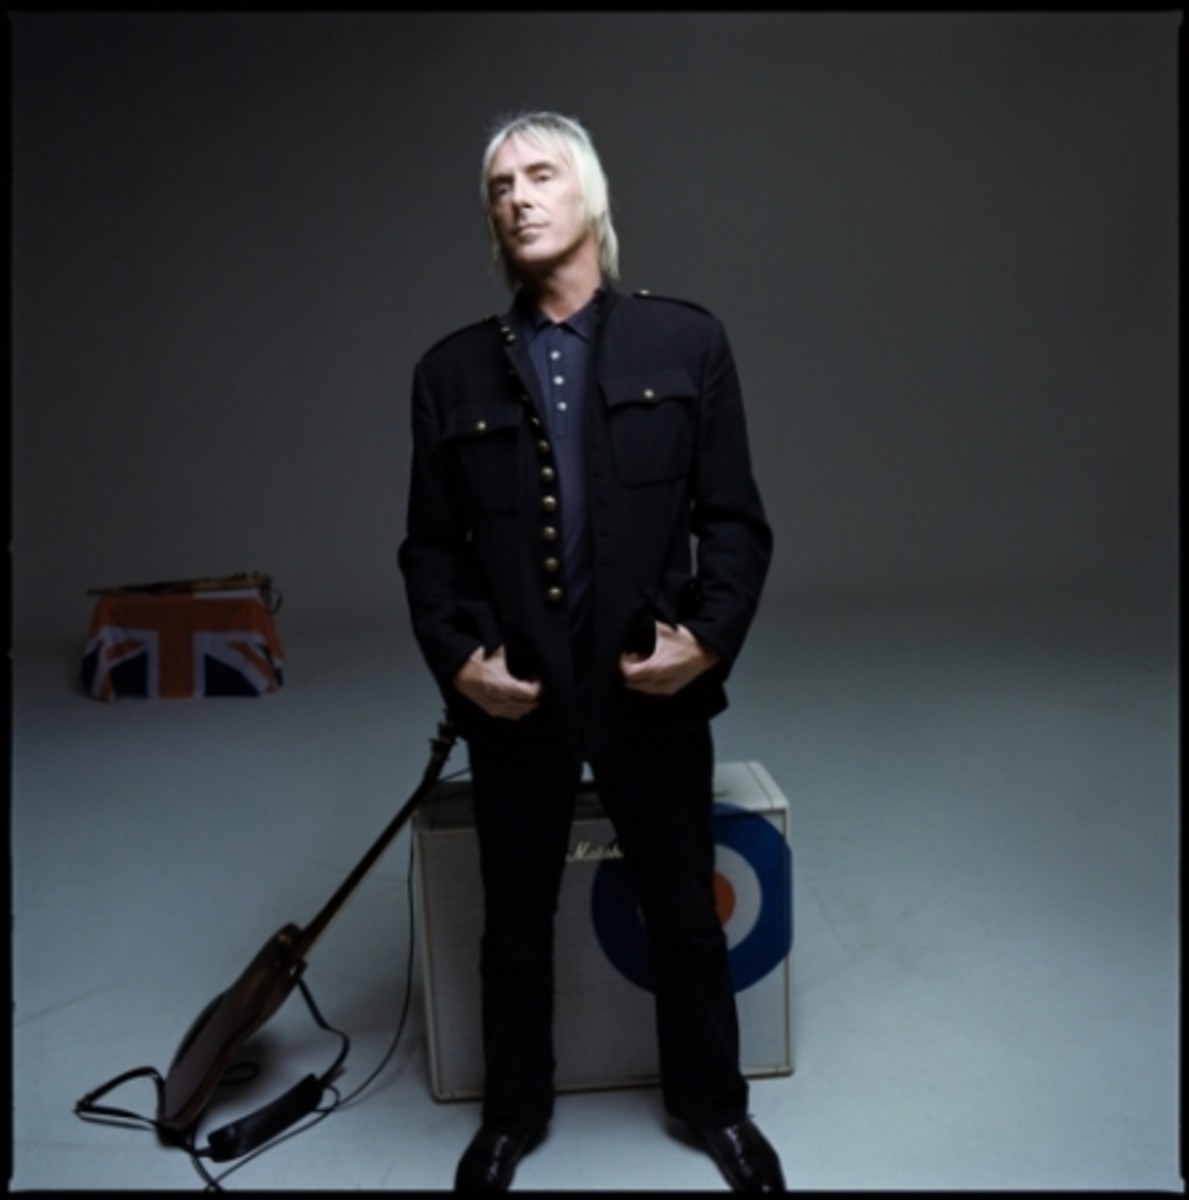 Paul Weller is one of the 12 artists whose albums were shortlisted for the 2010 Barclaycard Mercury Prize.